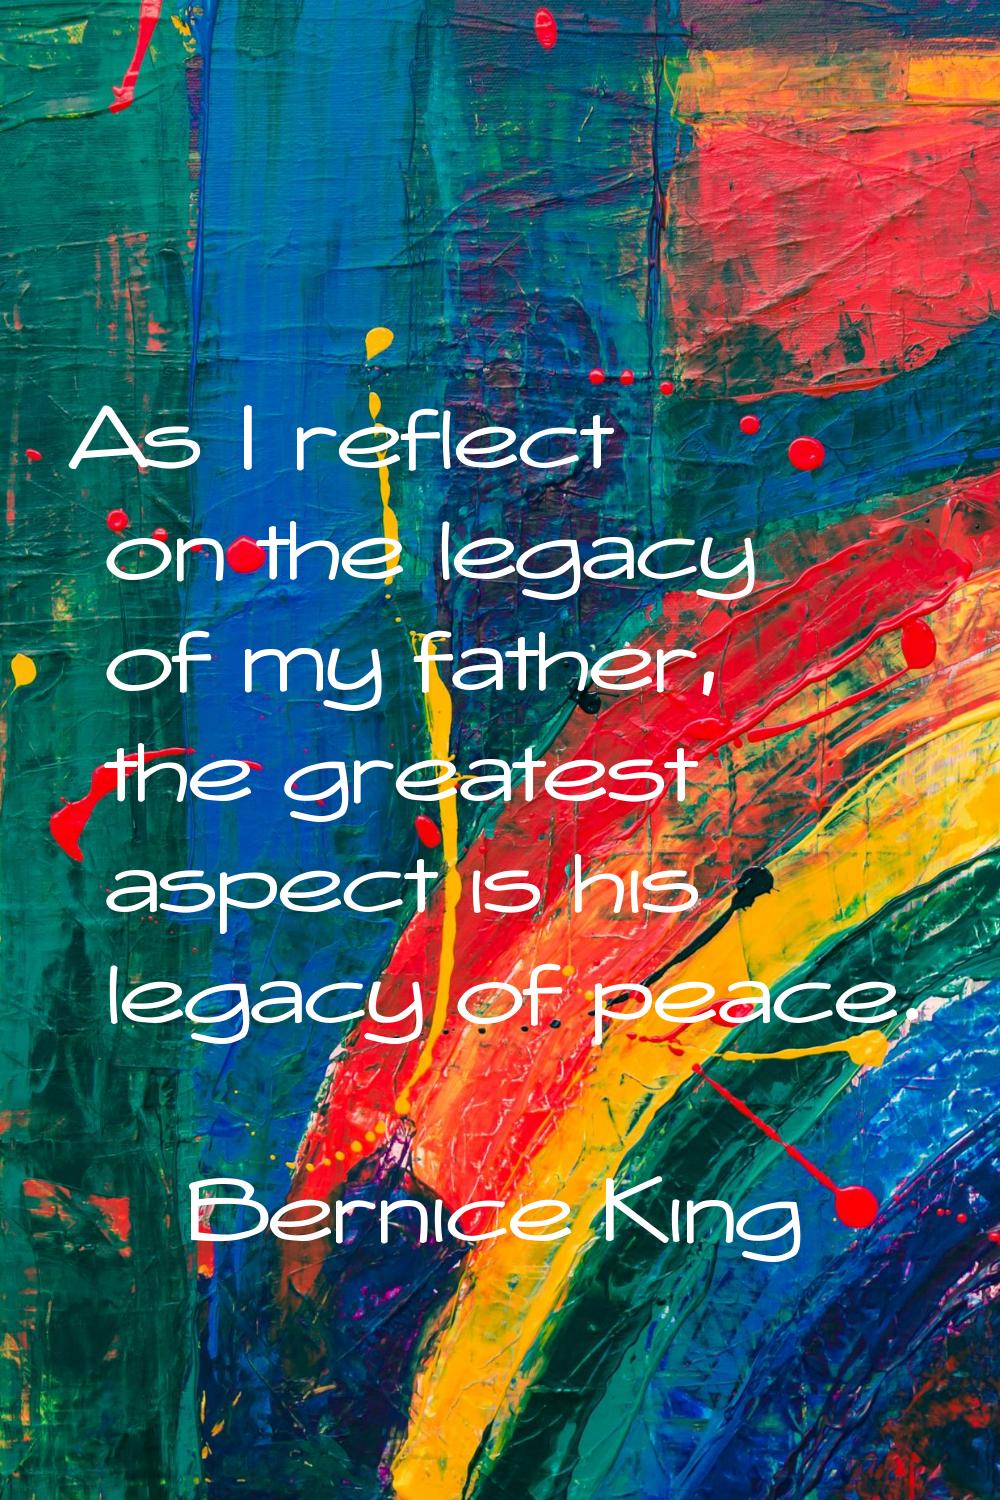 As I reflect on the legacy of my father, the greatest aspect is his legacy of peace.